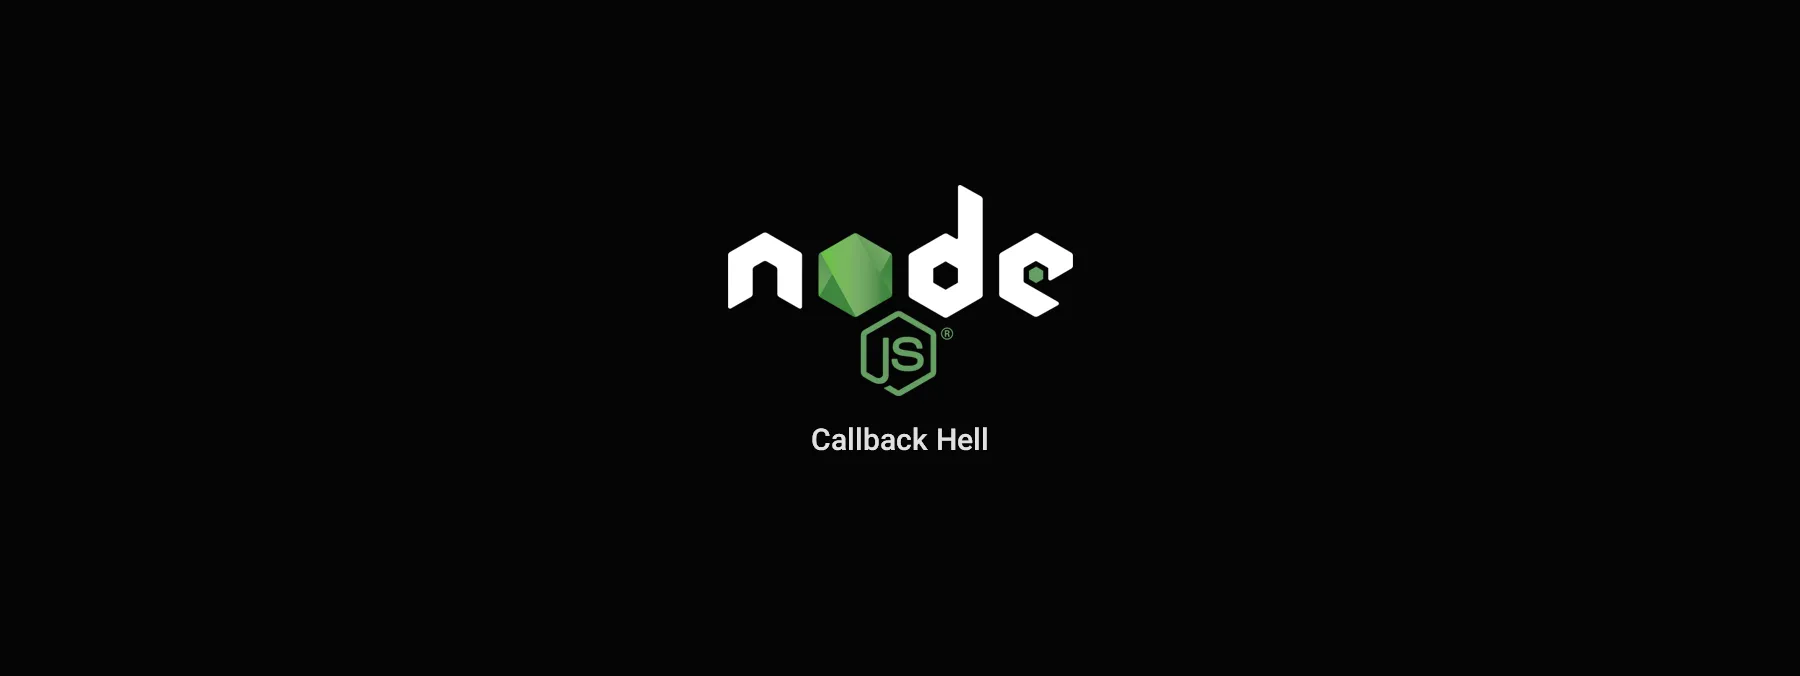 Reviewing “callback hell” before the first cross-platform release of yield in node 0.11